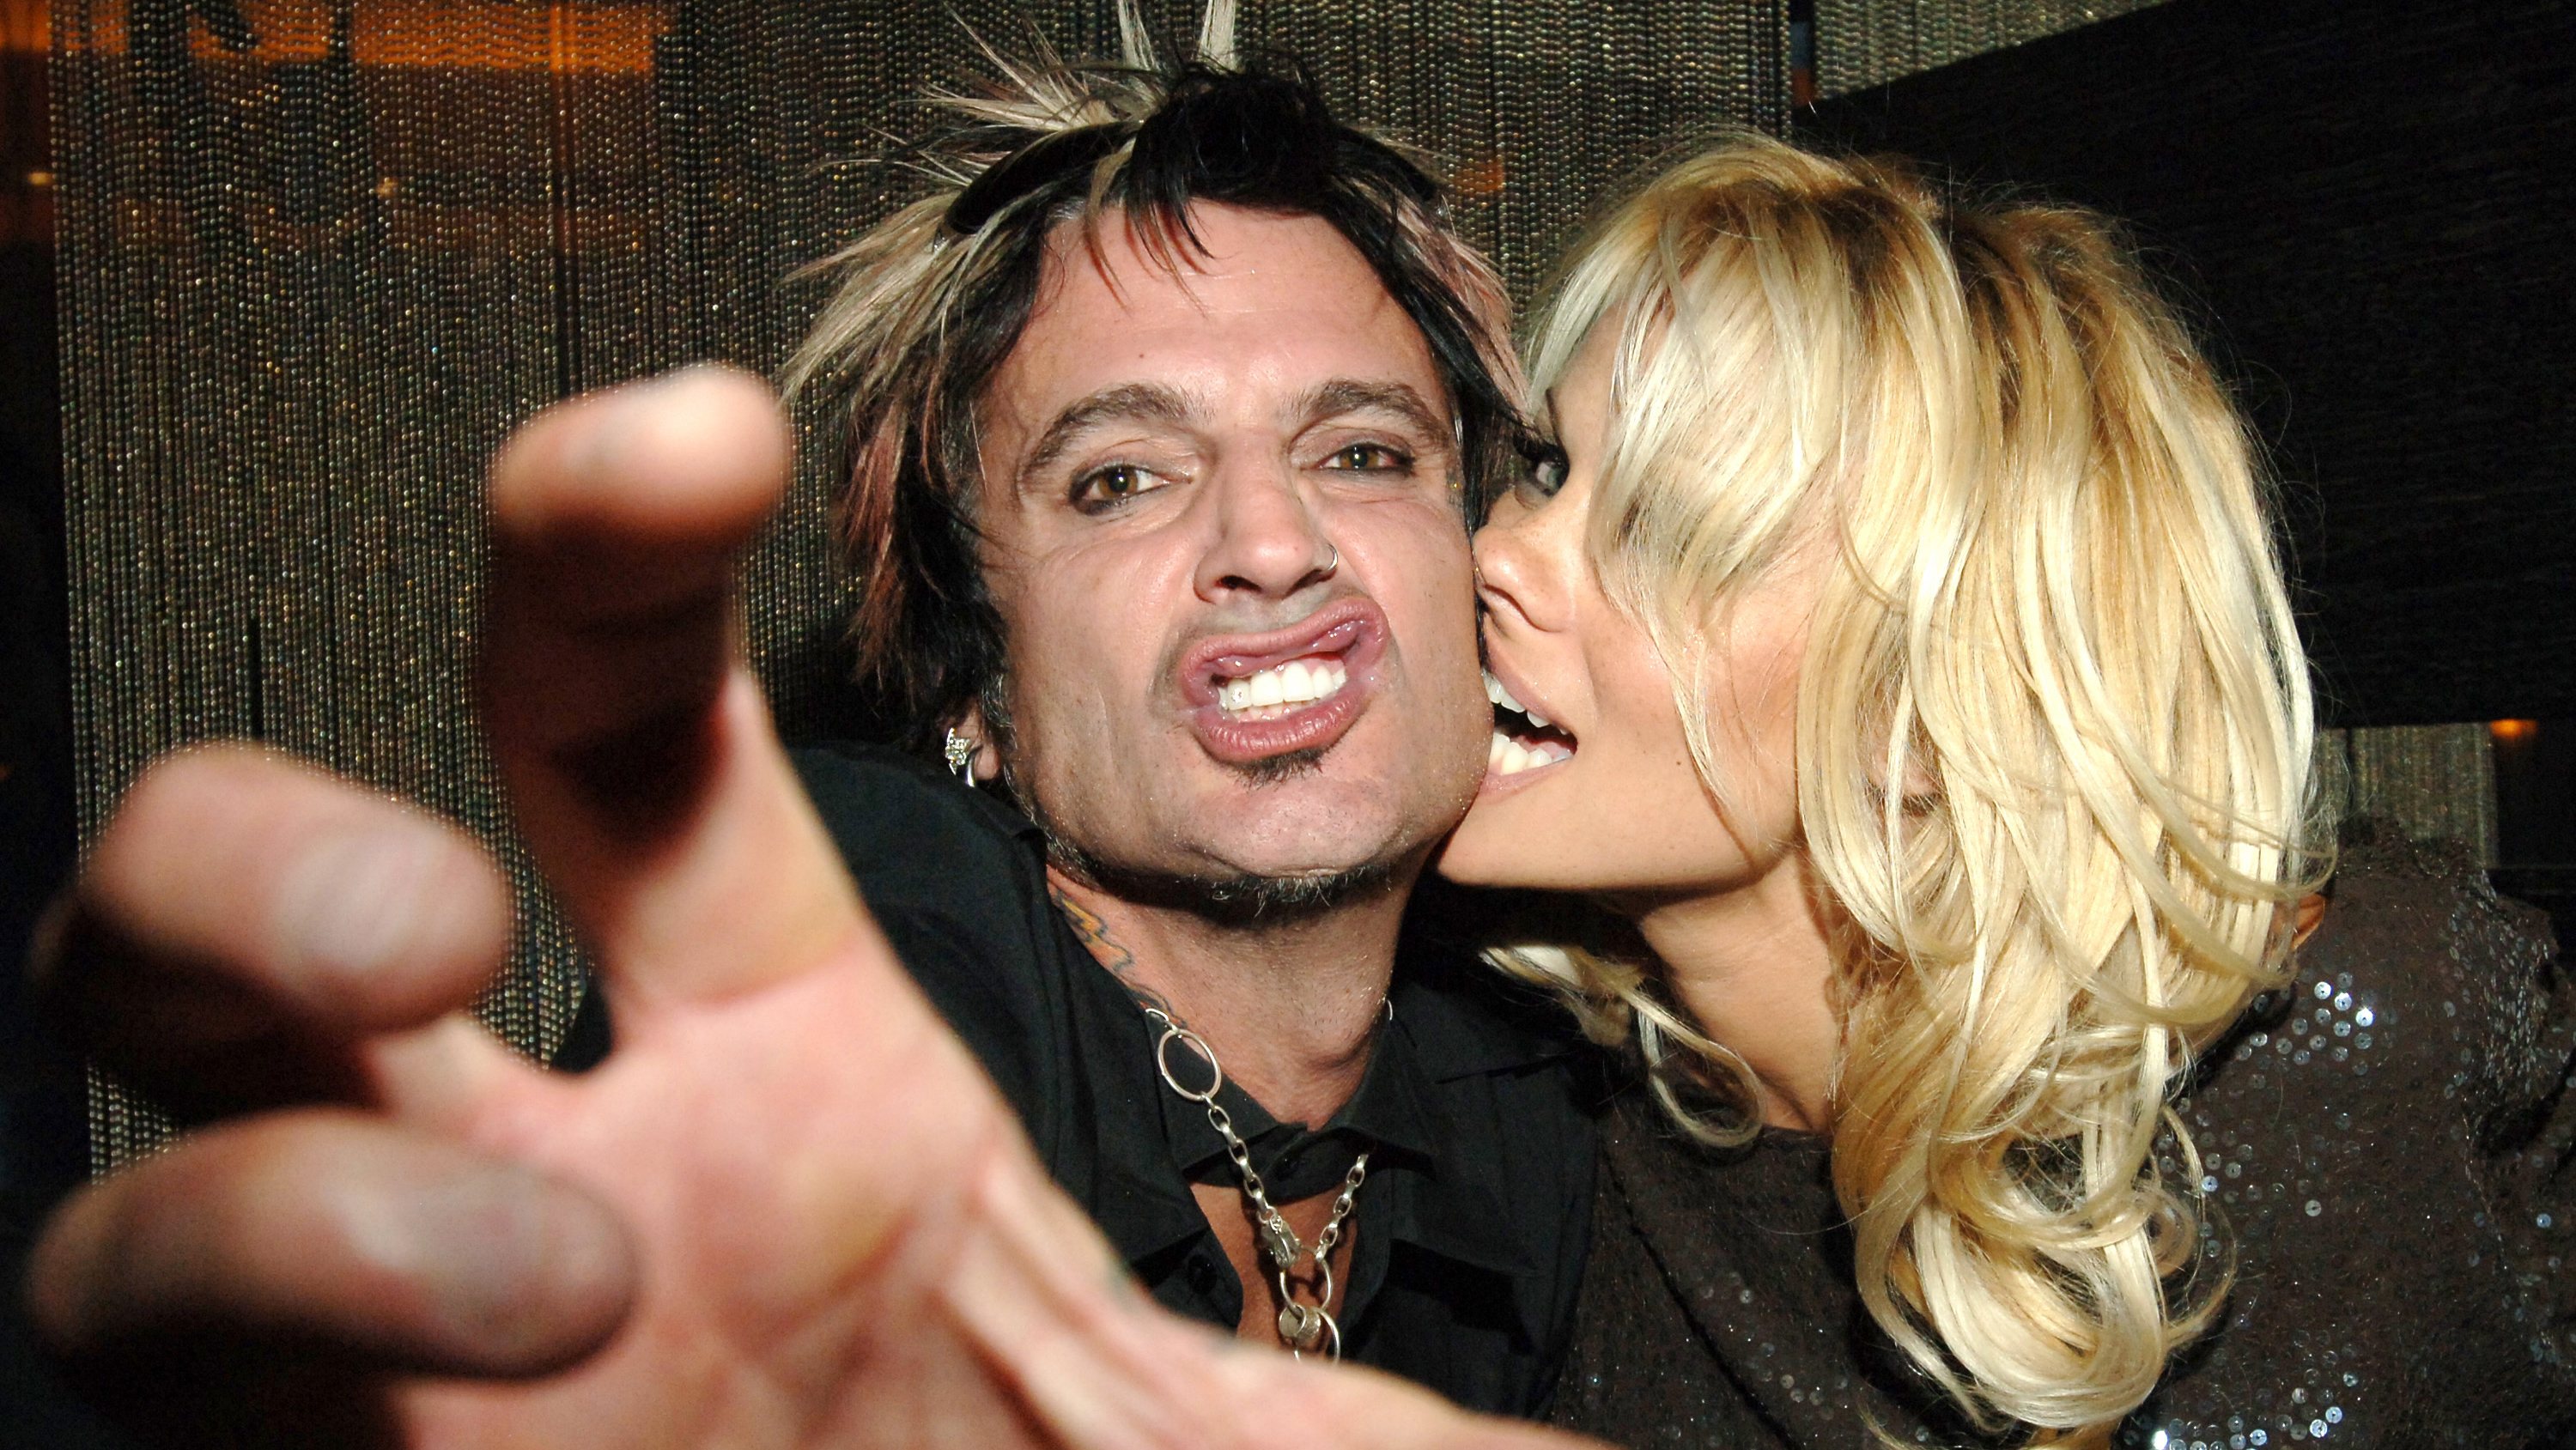 Pamela Anderson and Tommy Lee at The Heart Bar at Planet Hollywood Resort and Casino